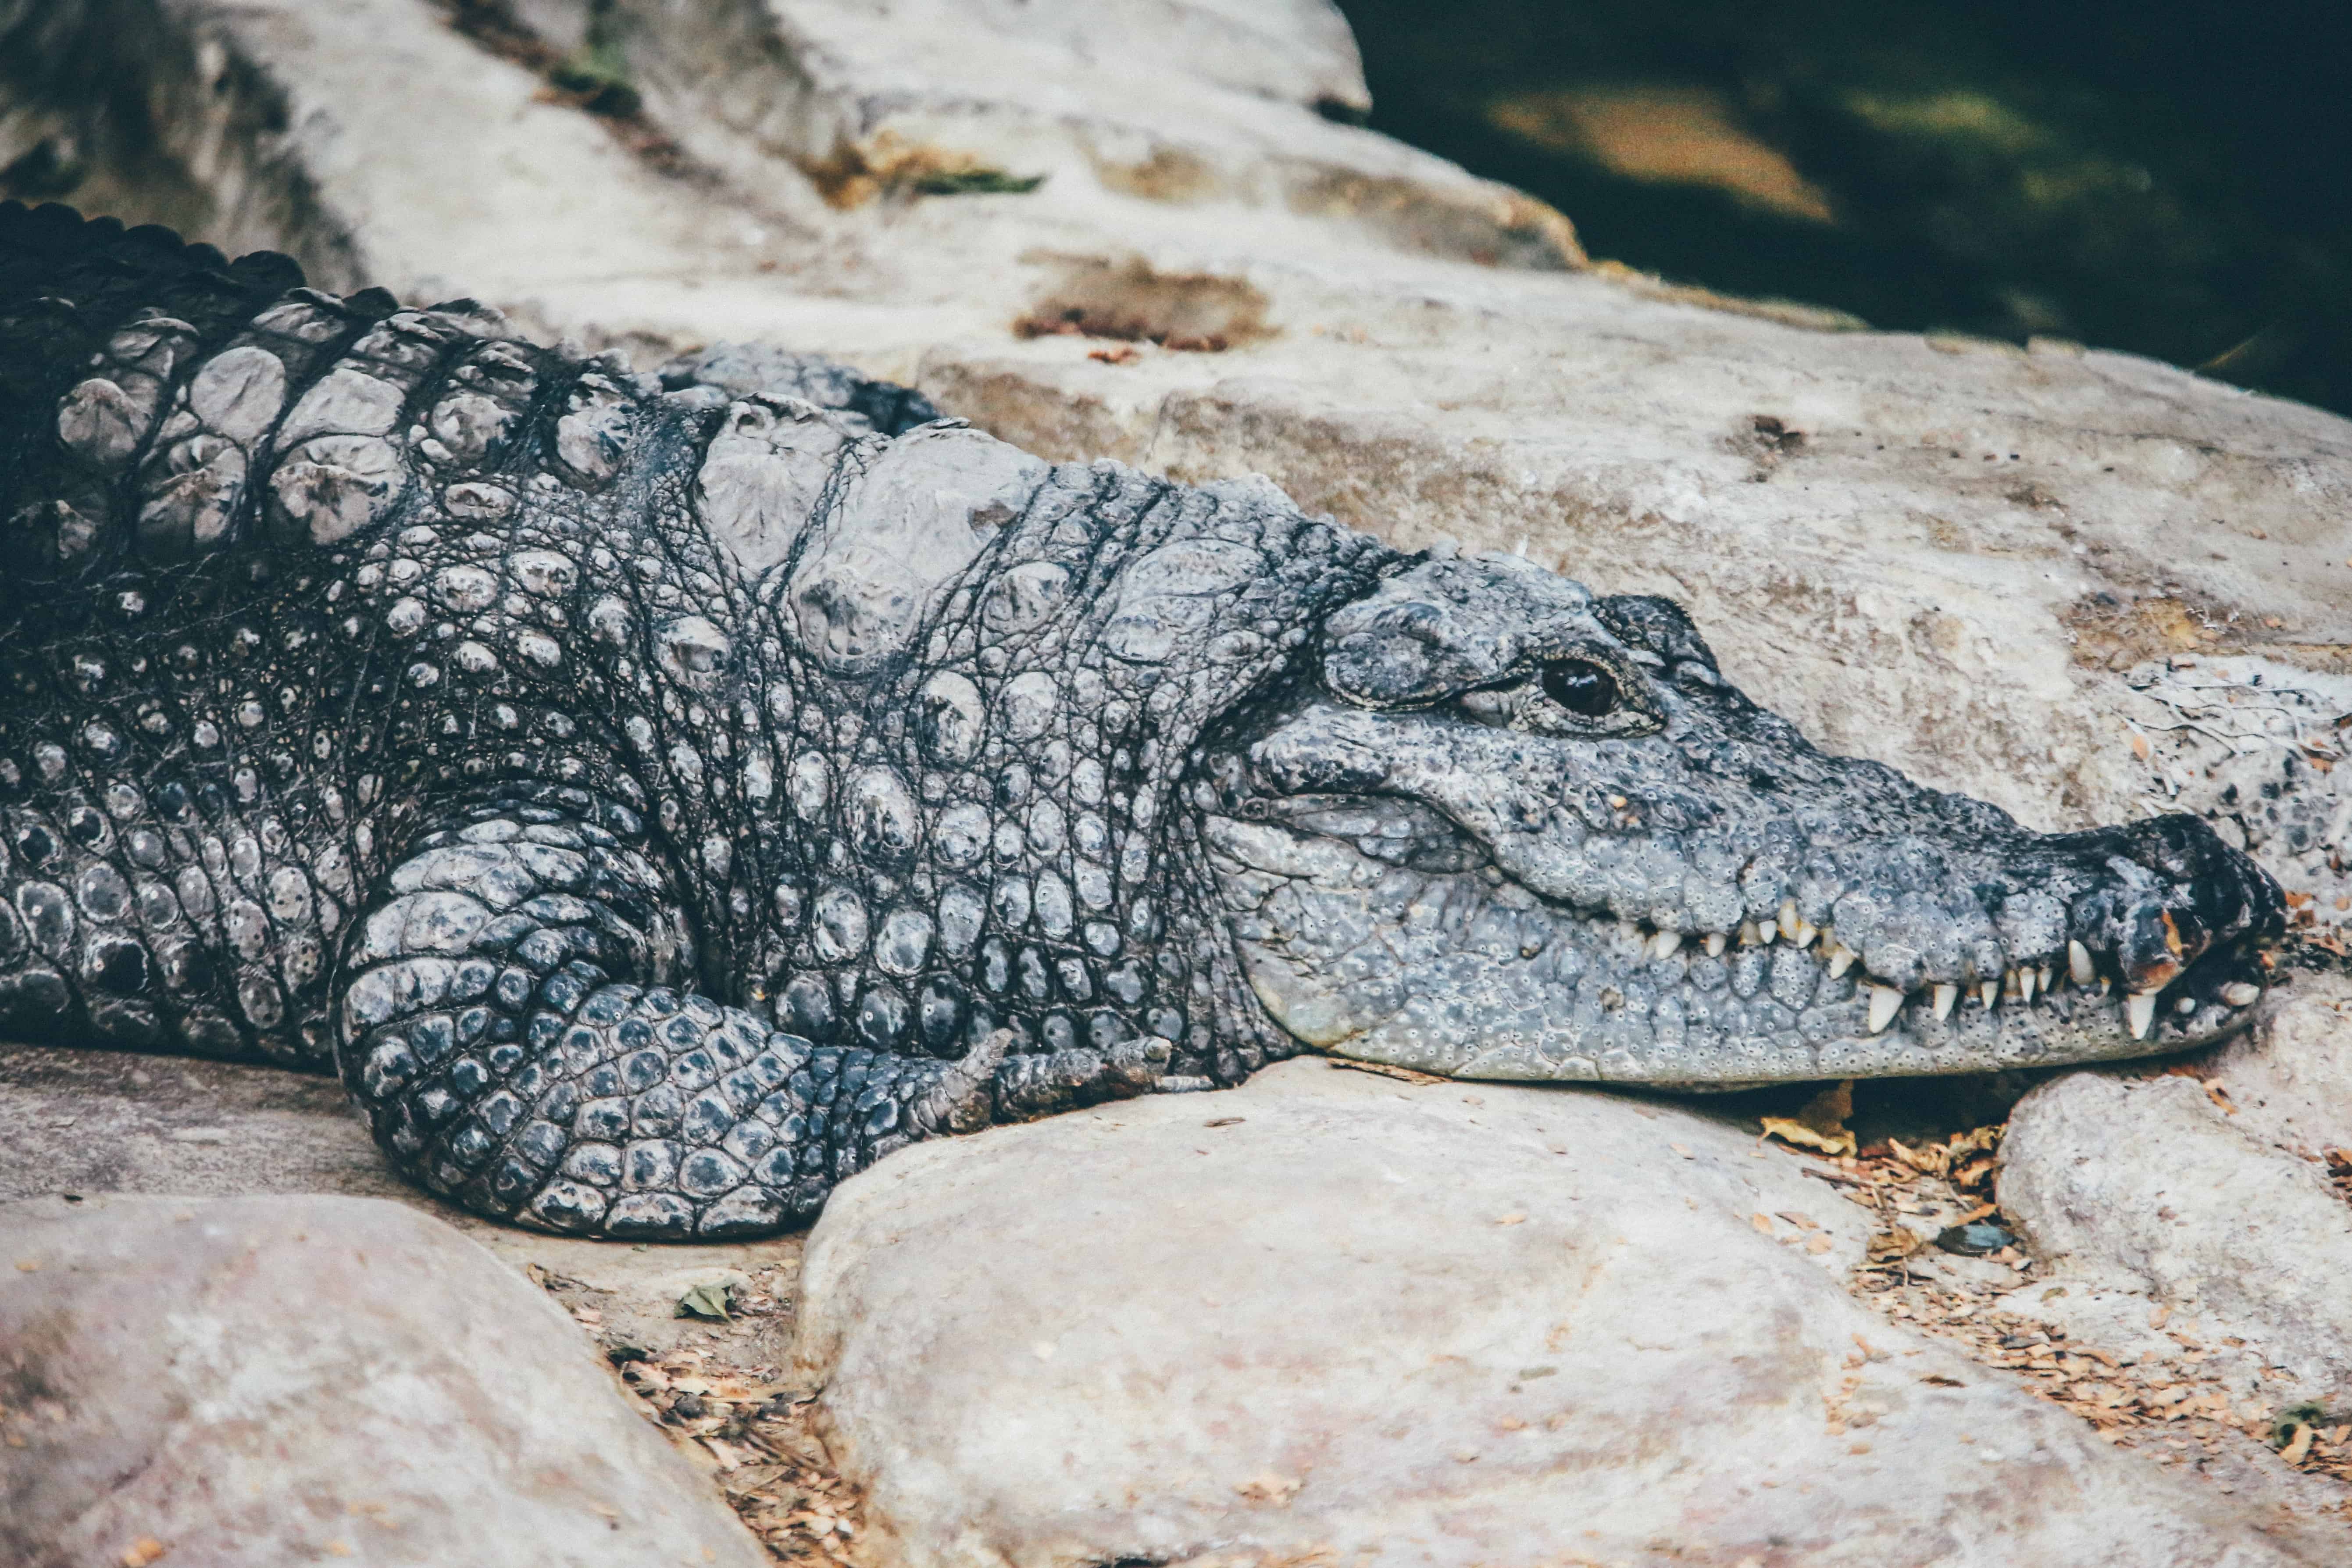 Crocodile Leather: 4 Things You Should Know About It